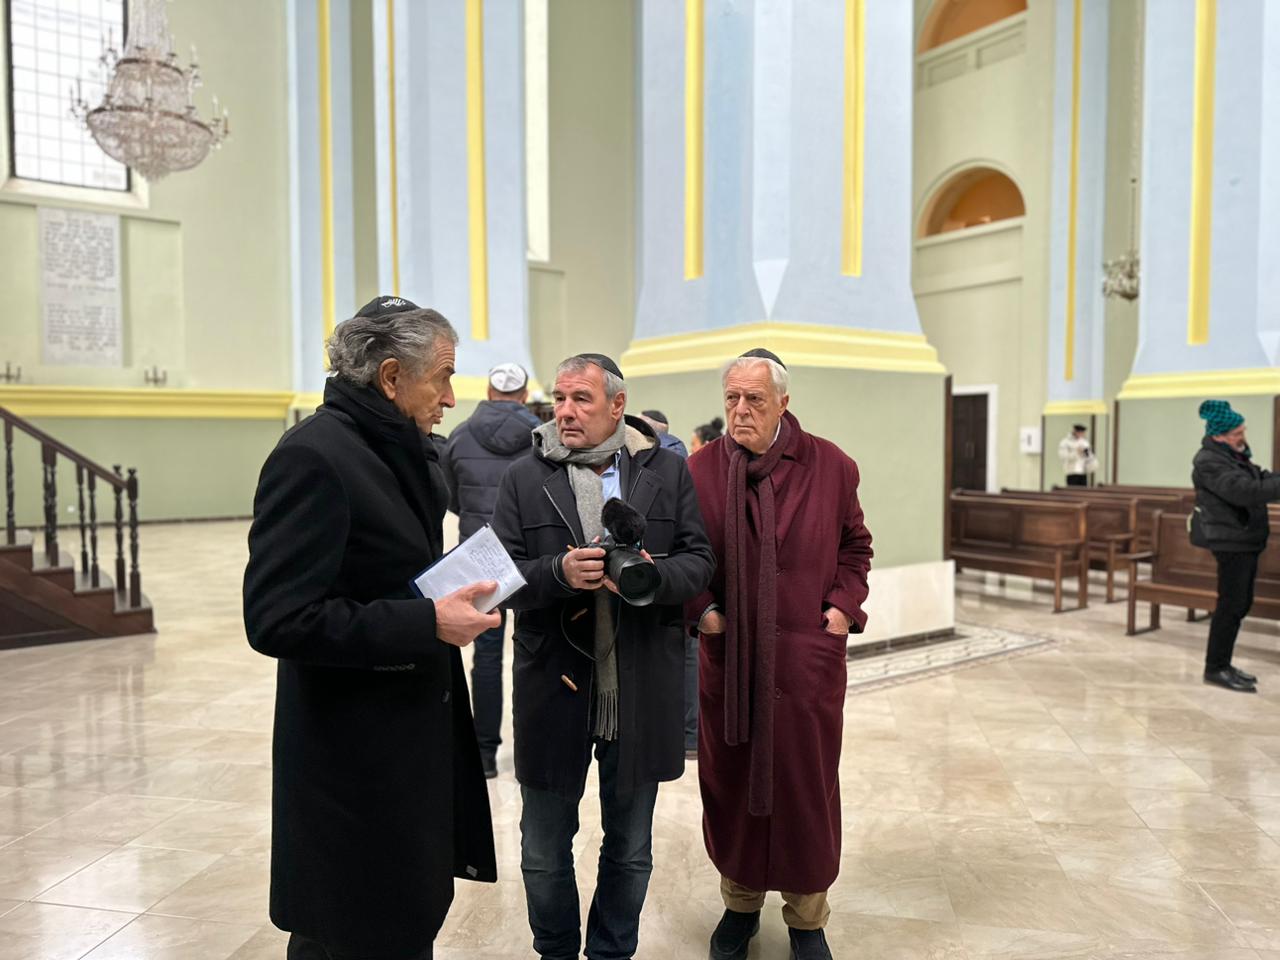 BHL, Marc Roussel and Gilles Hertzog, visiting the exhibition dedicated to the Righteous of Ukraine at the Drohobytch synagogue in Lviv oblast.